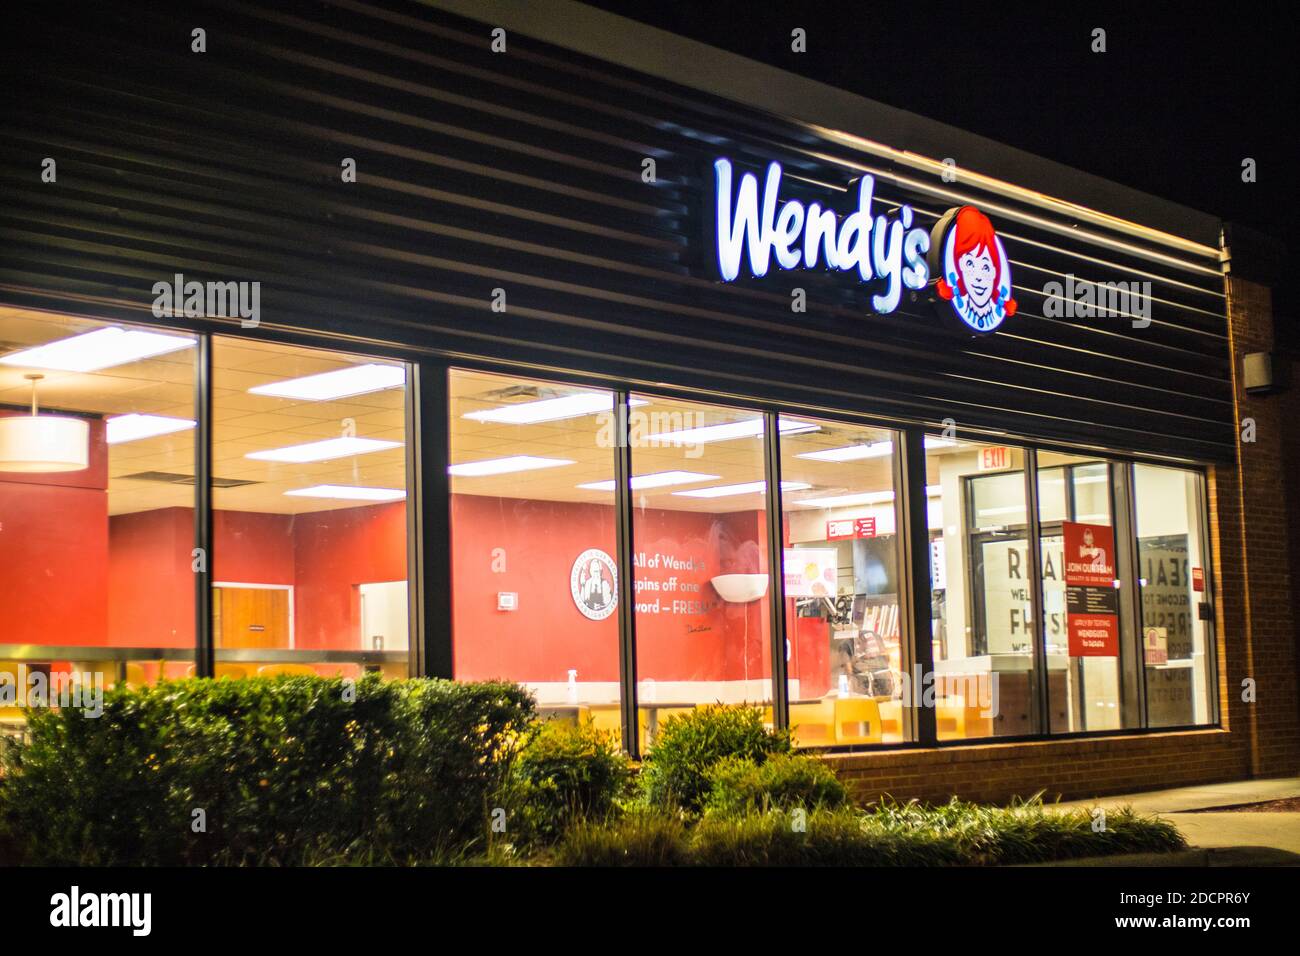 Augusta, Ga / USA - 11 20 20: Wendys Restaurant fast food side view at night Stock Photo